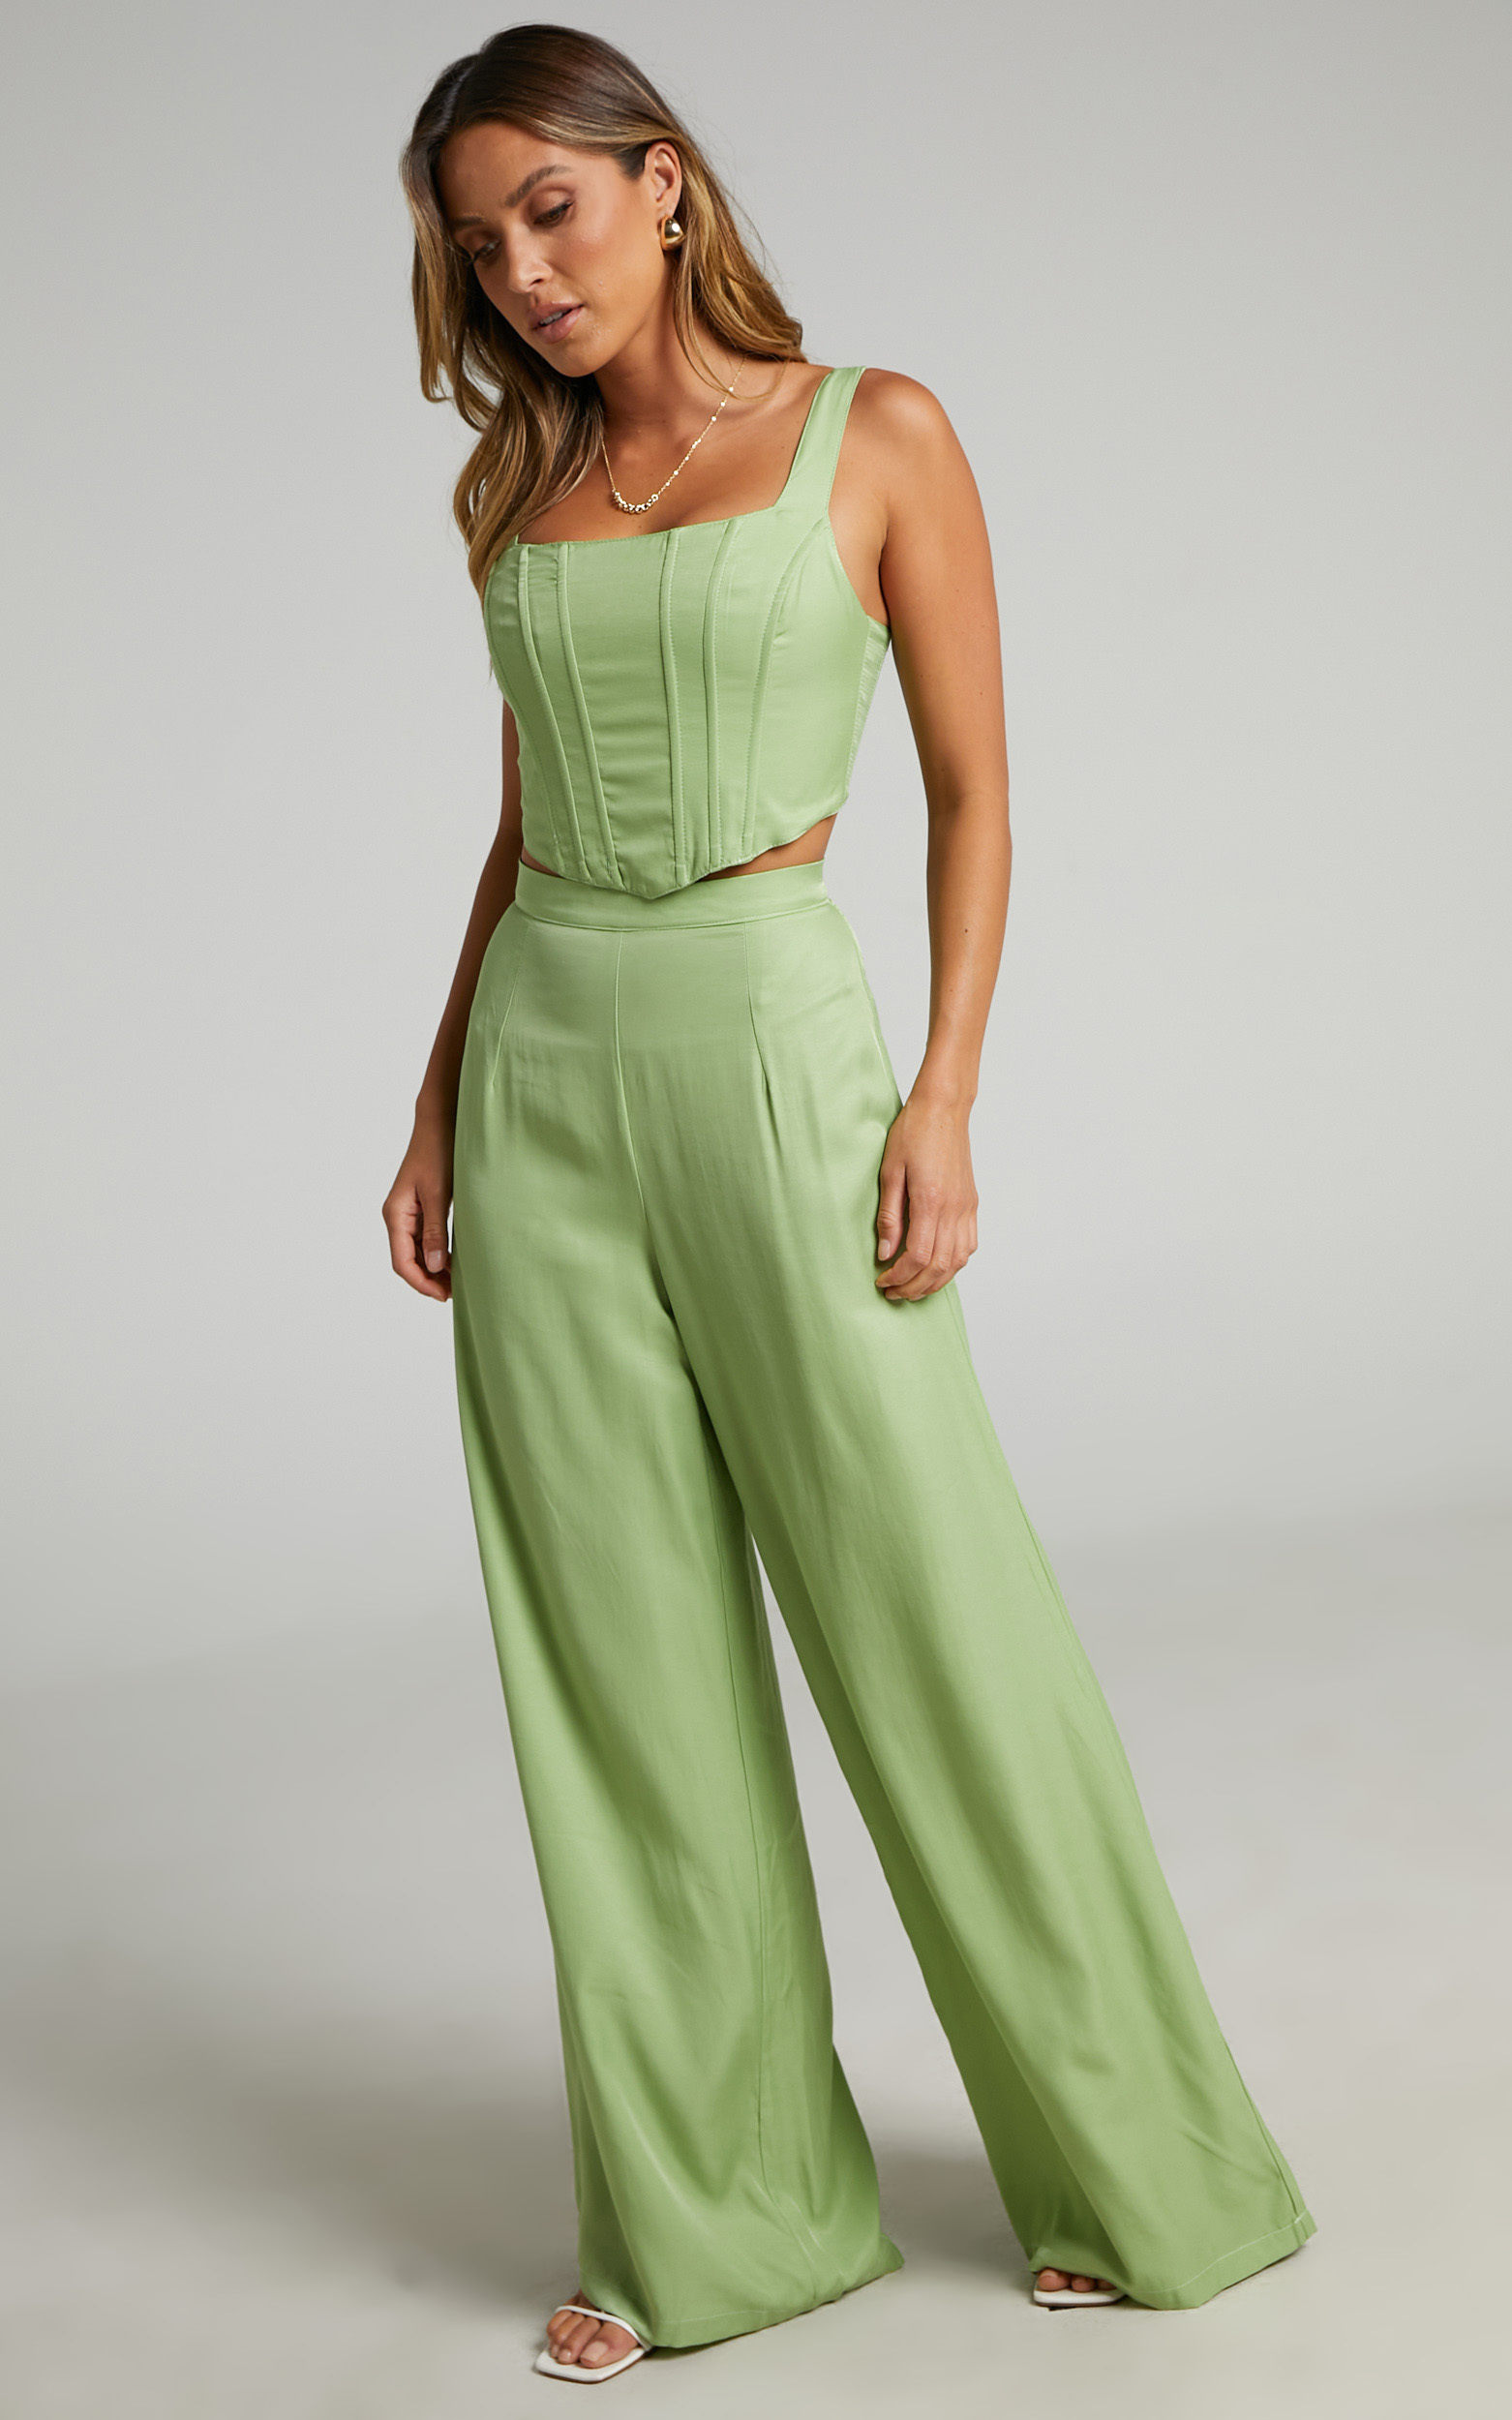 Seven Wonders - Seville Pant in Avocado - XS, GRN1, hi-res image number null